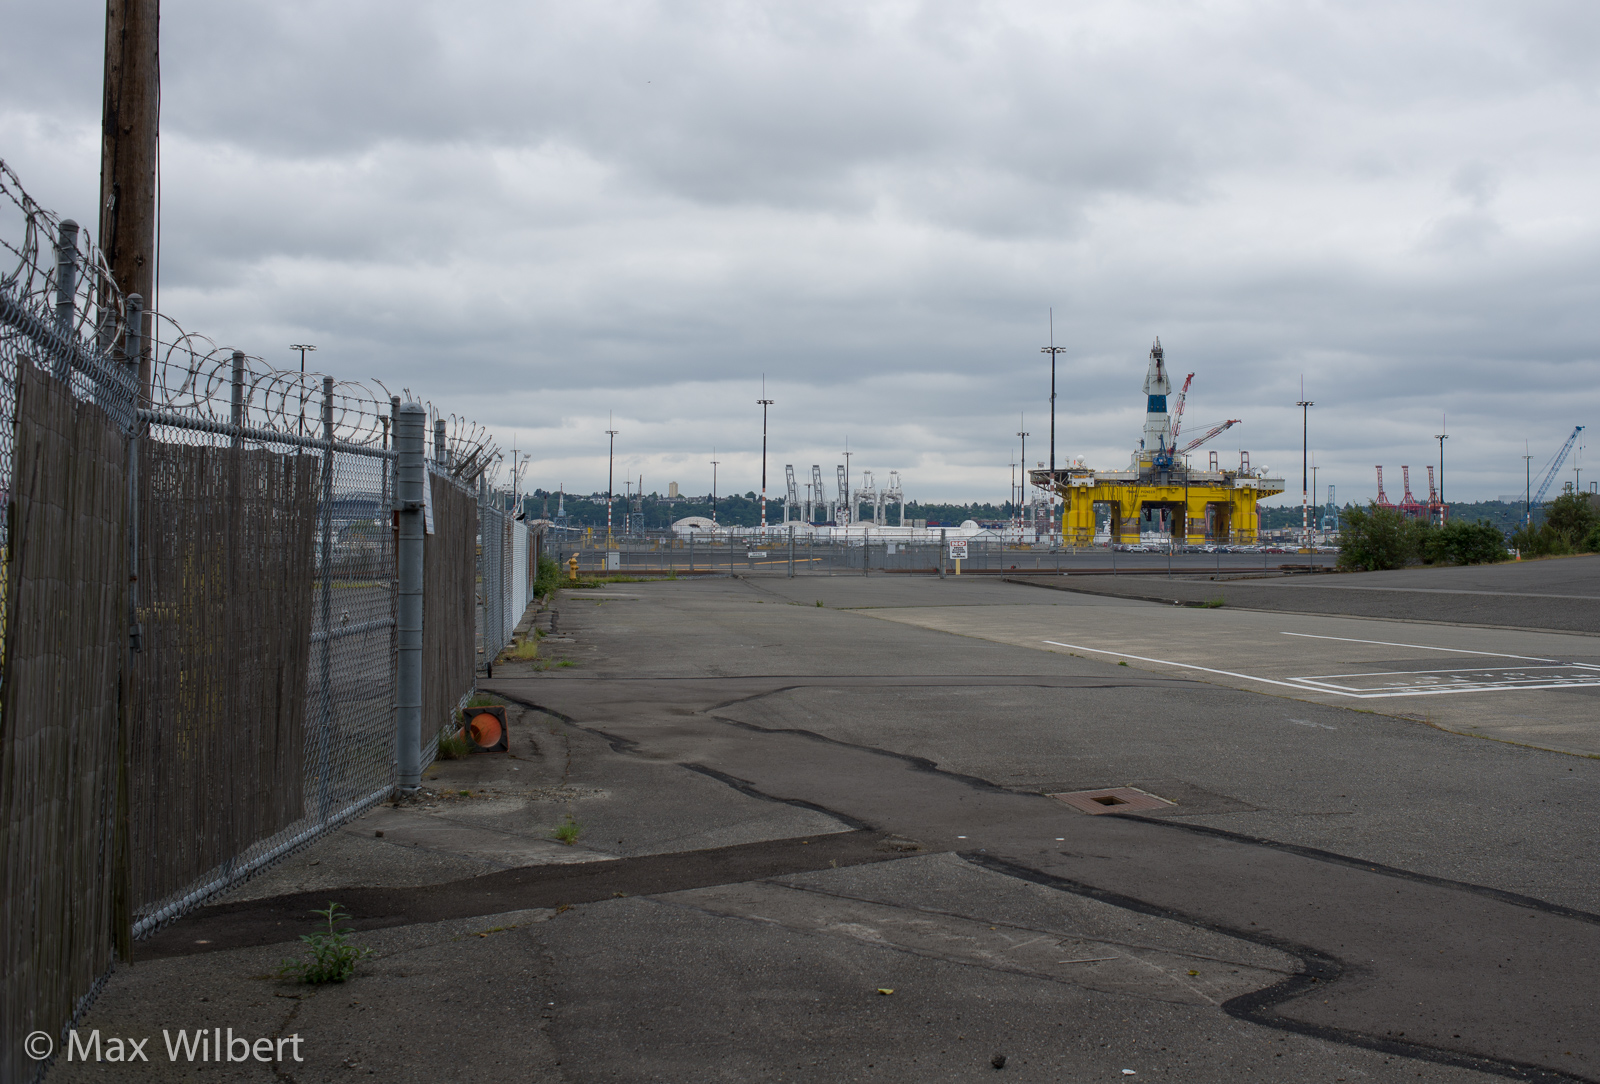 The rig is being housed at Terminal 5, a massive expanse of concrete and piers.